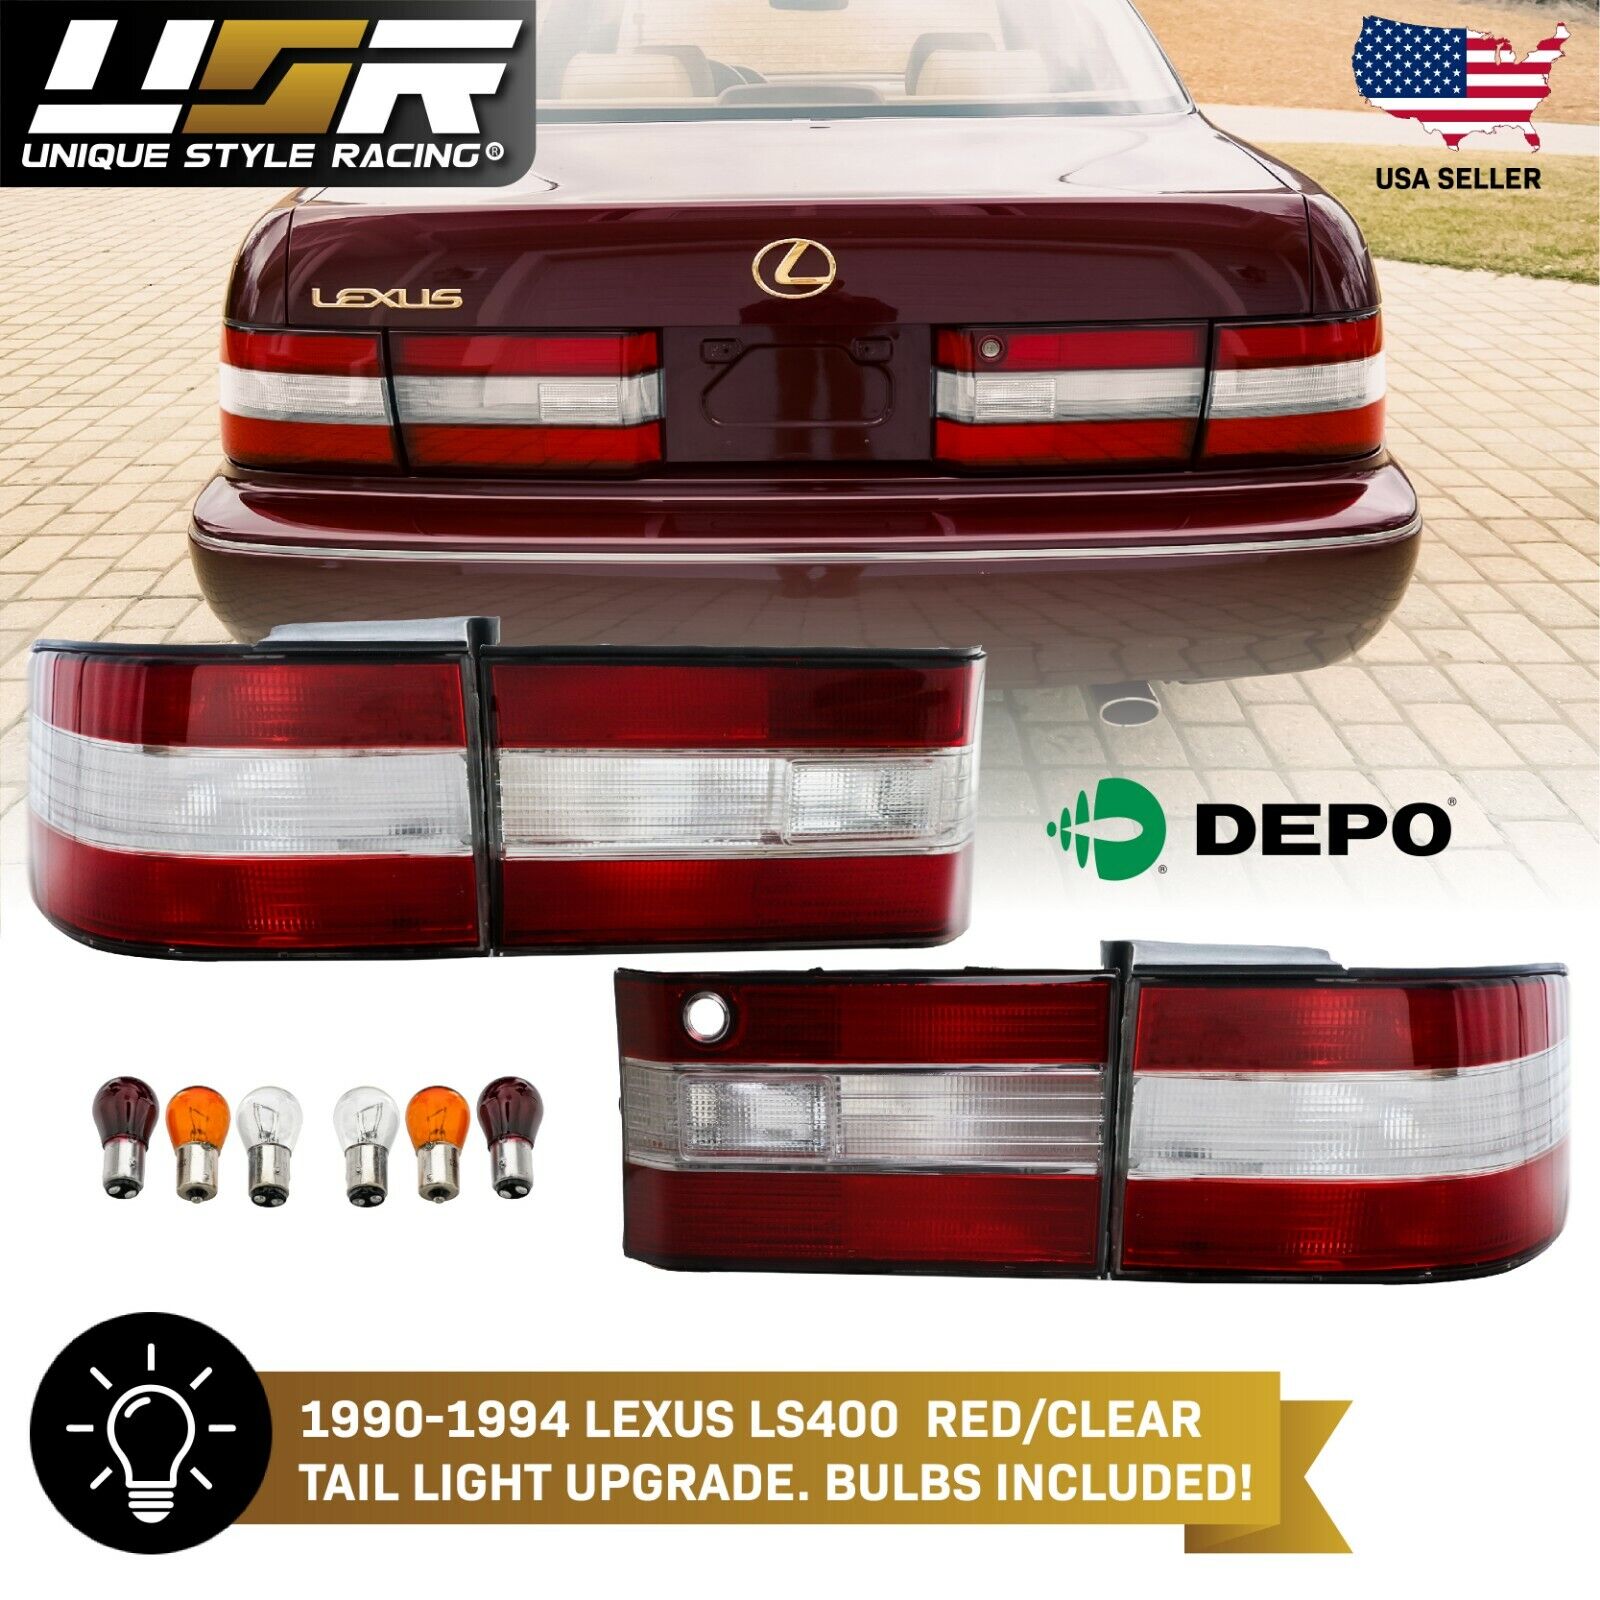 4PCS DEPO JDM Style Red Clear Tail Lights For 1991-1994 Lexus LS400 / LS 400